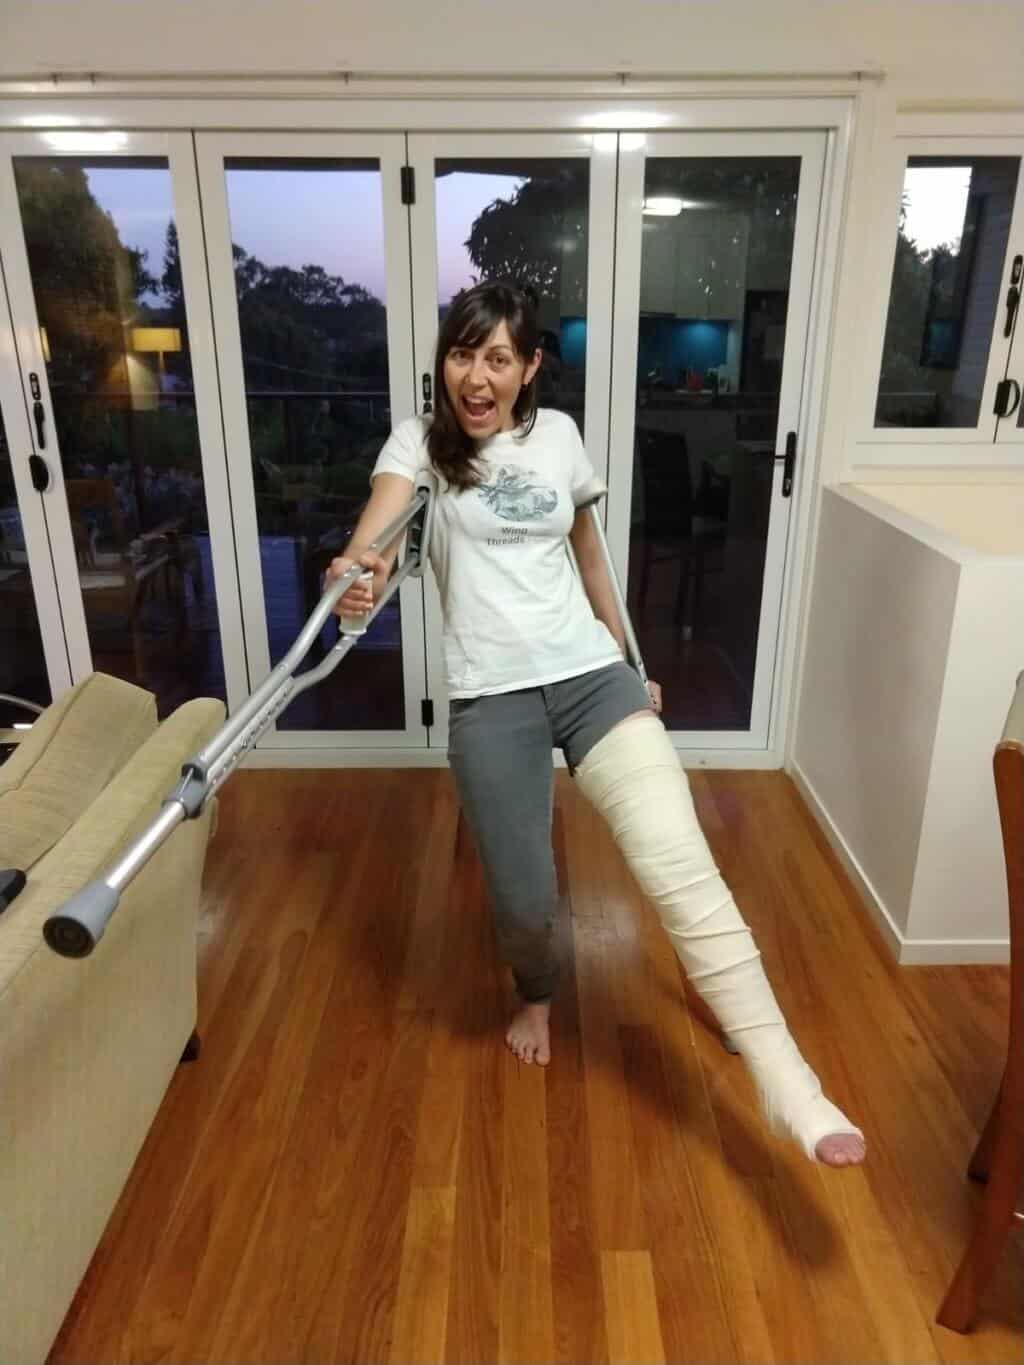 Amellia Formby dancing with her crutches and broken leg